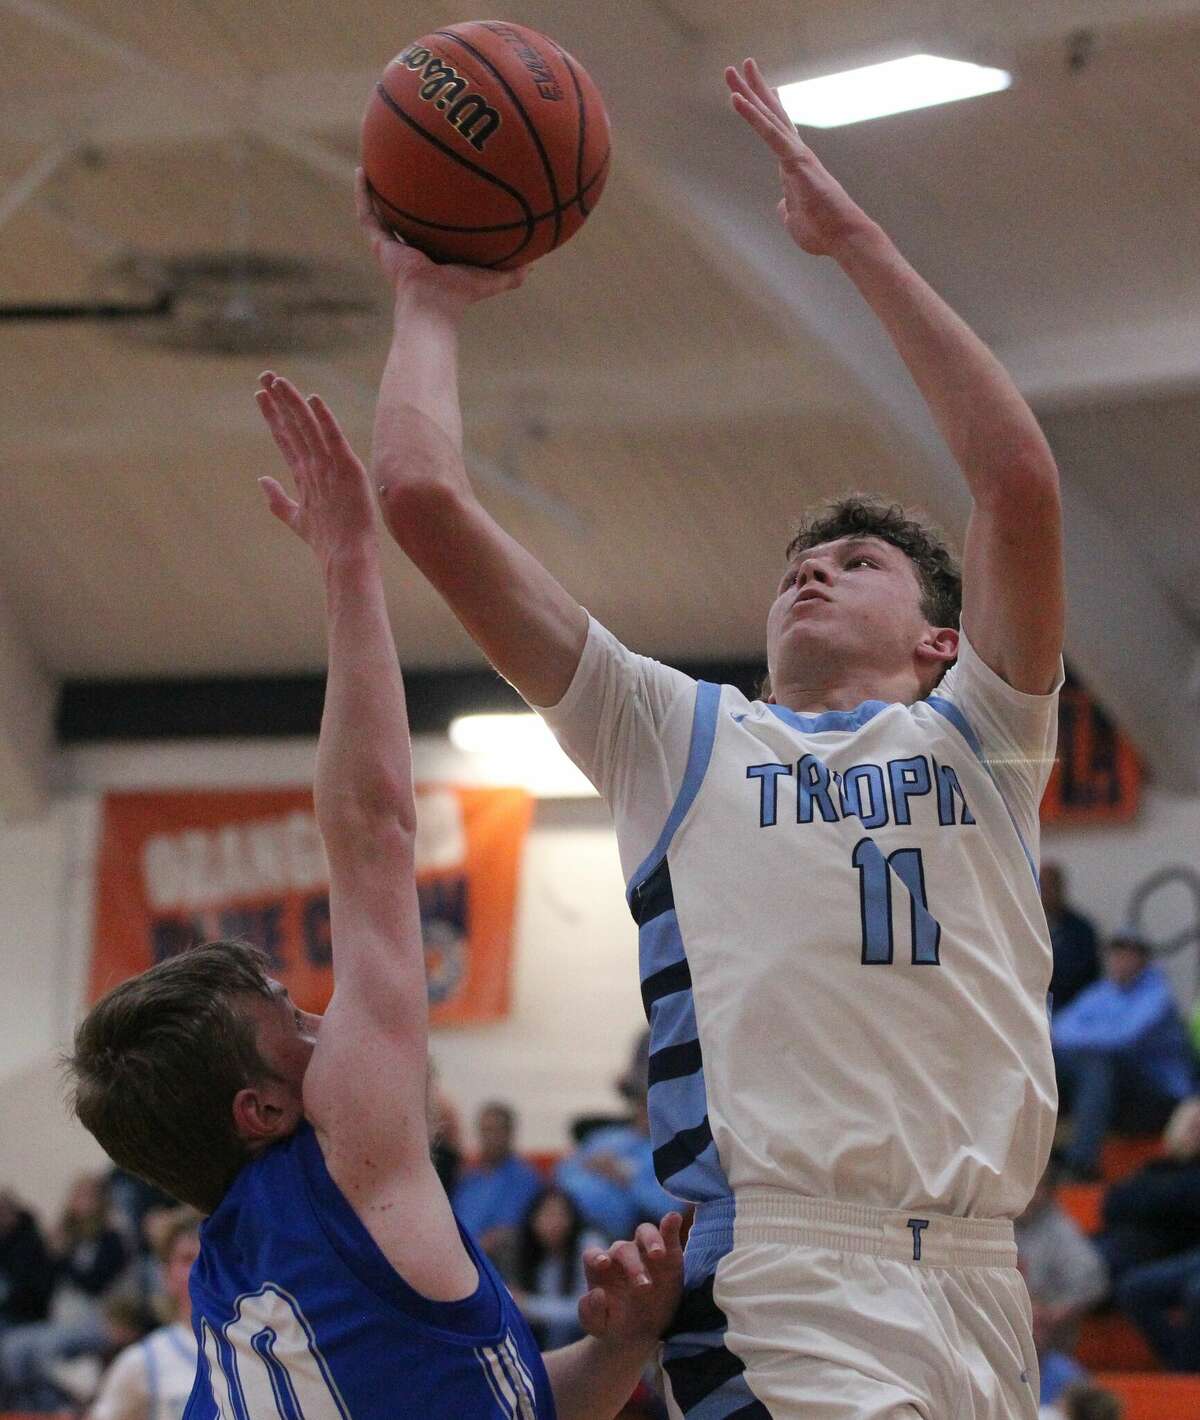 Action from the Triopia boys' basketball team's win over Springfield Lutheran at the Gene Bergschneider Turkey Tournament Tuesday night in New Berlin